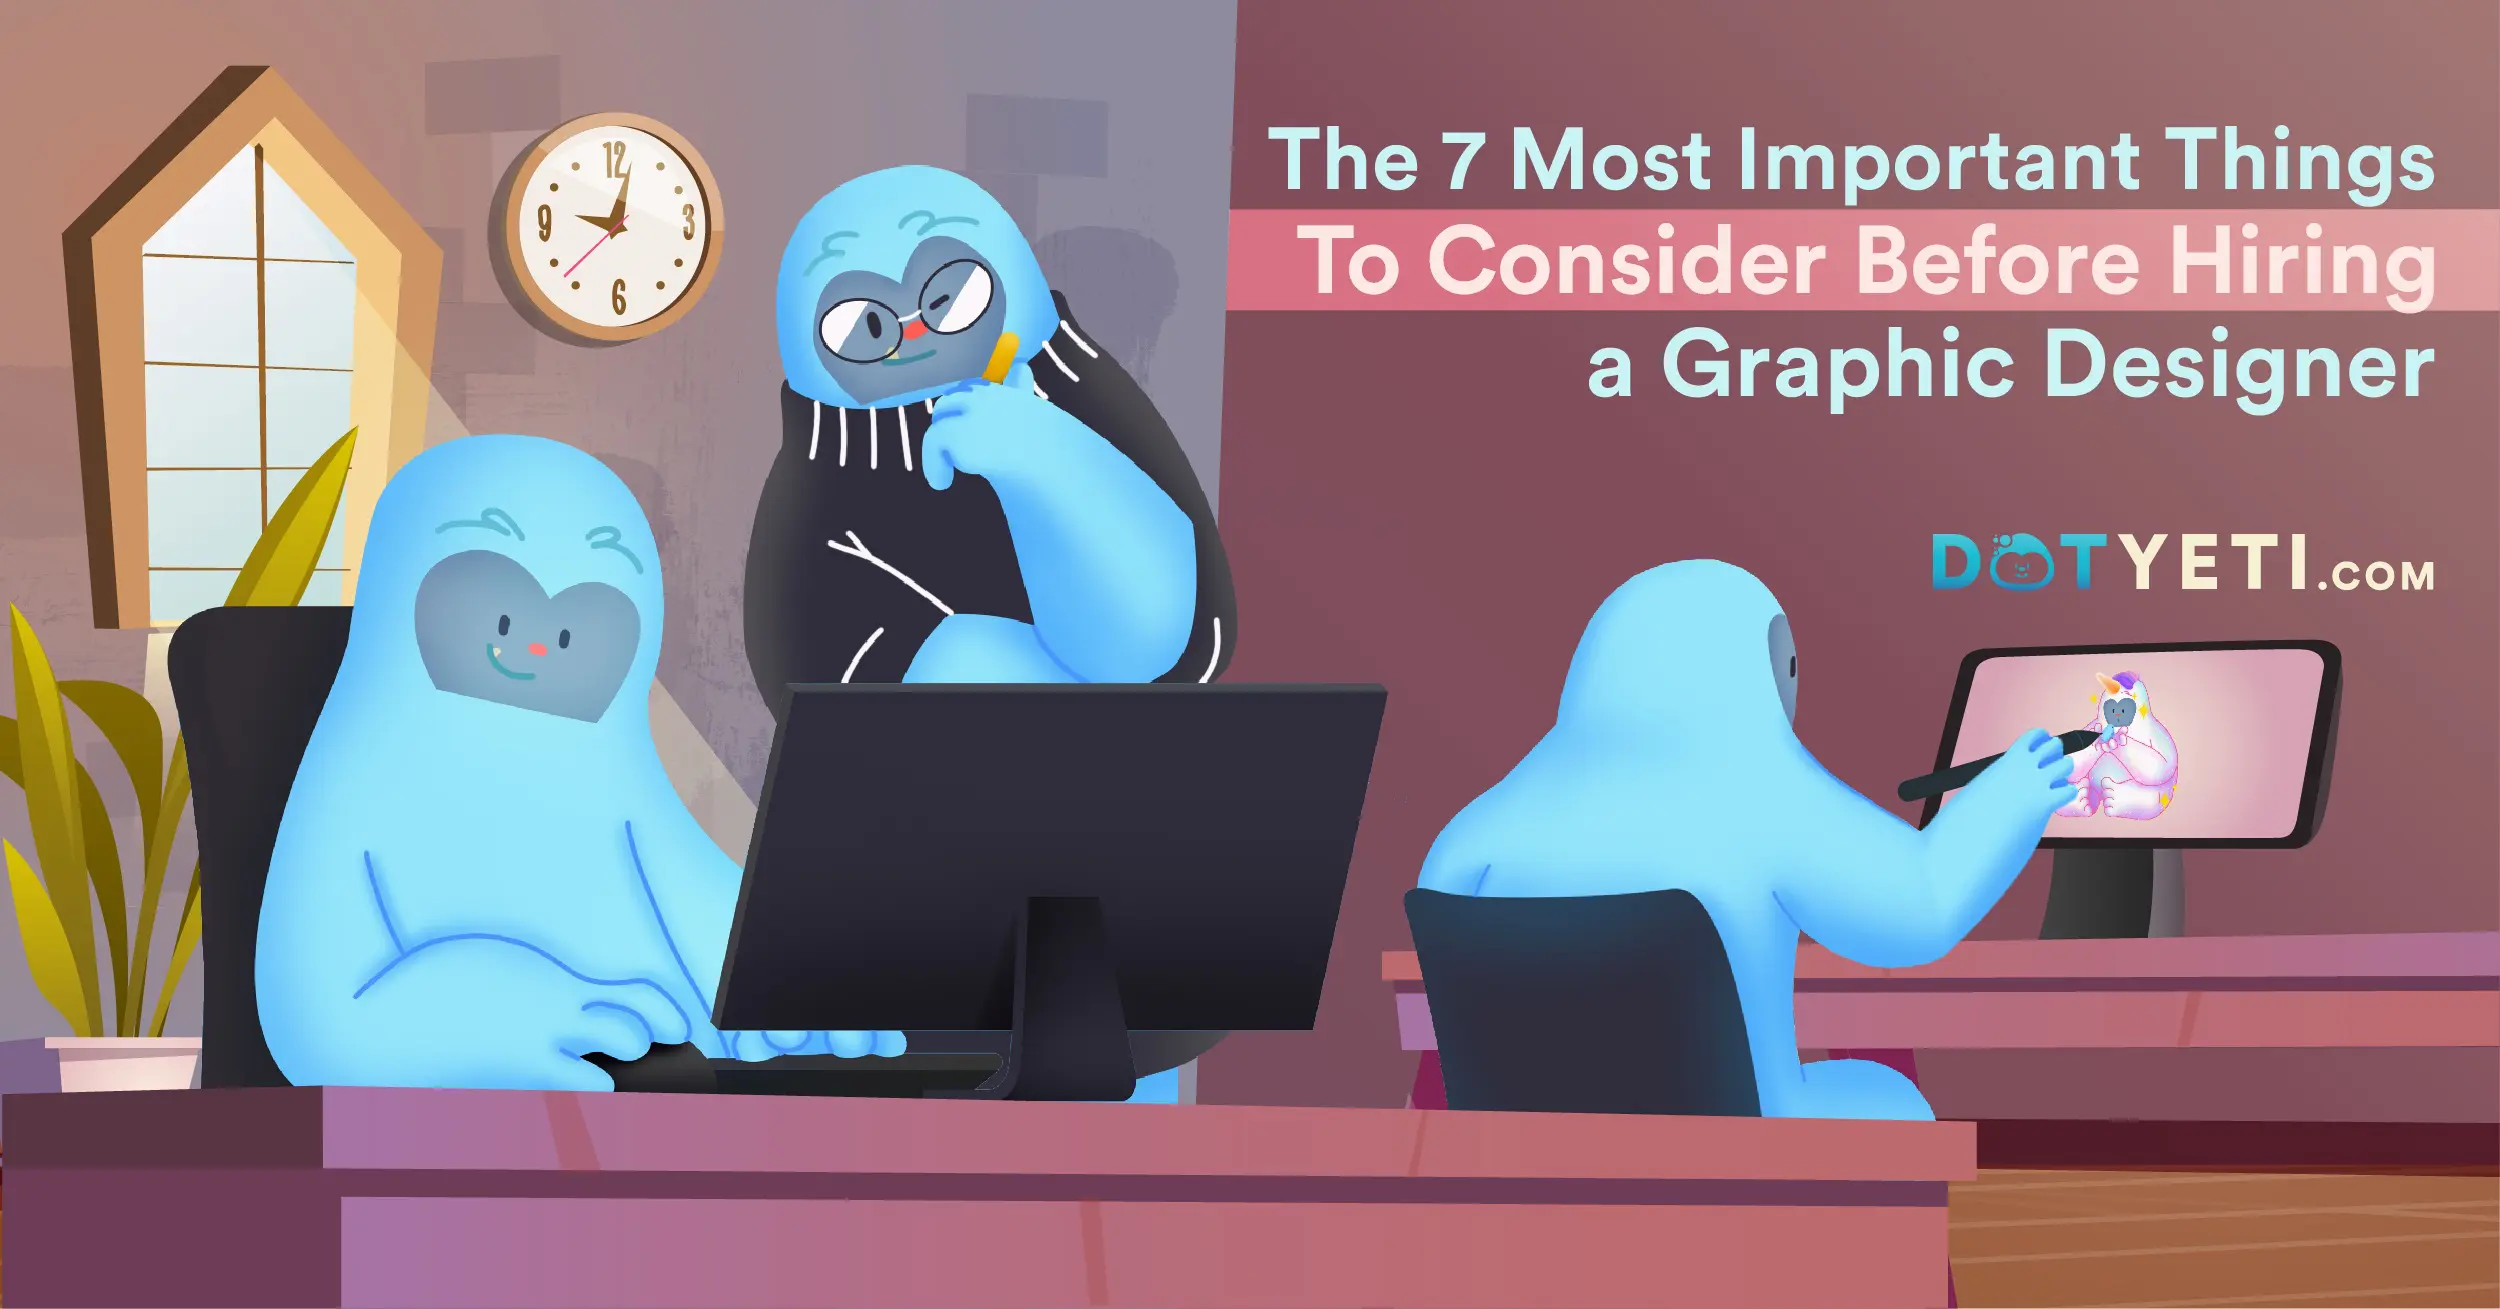 Consider These 7 Things Before Hiring A Graphic Designer